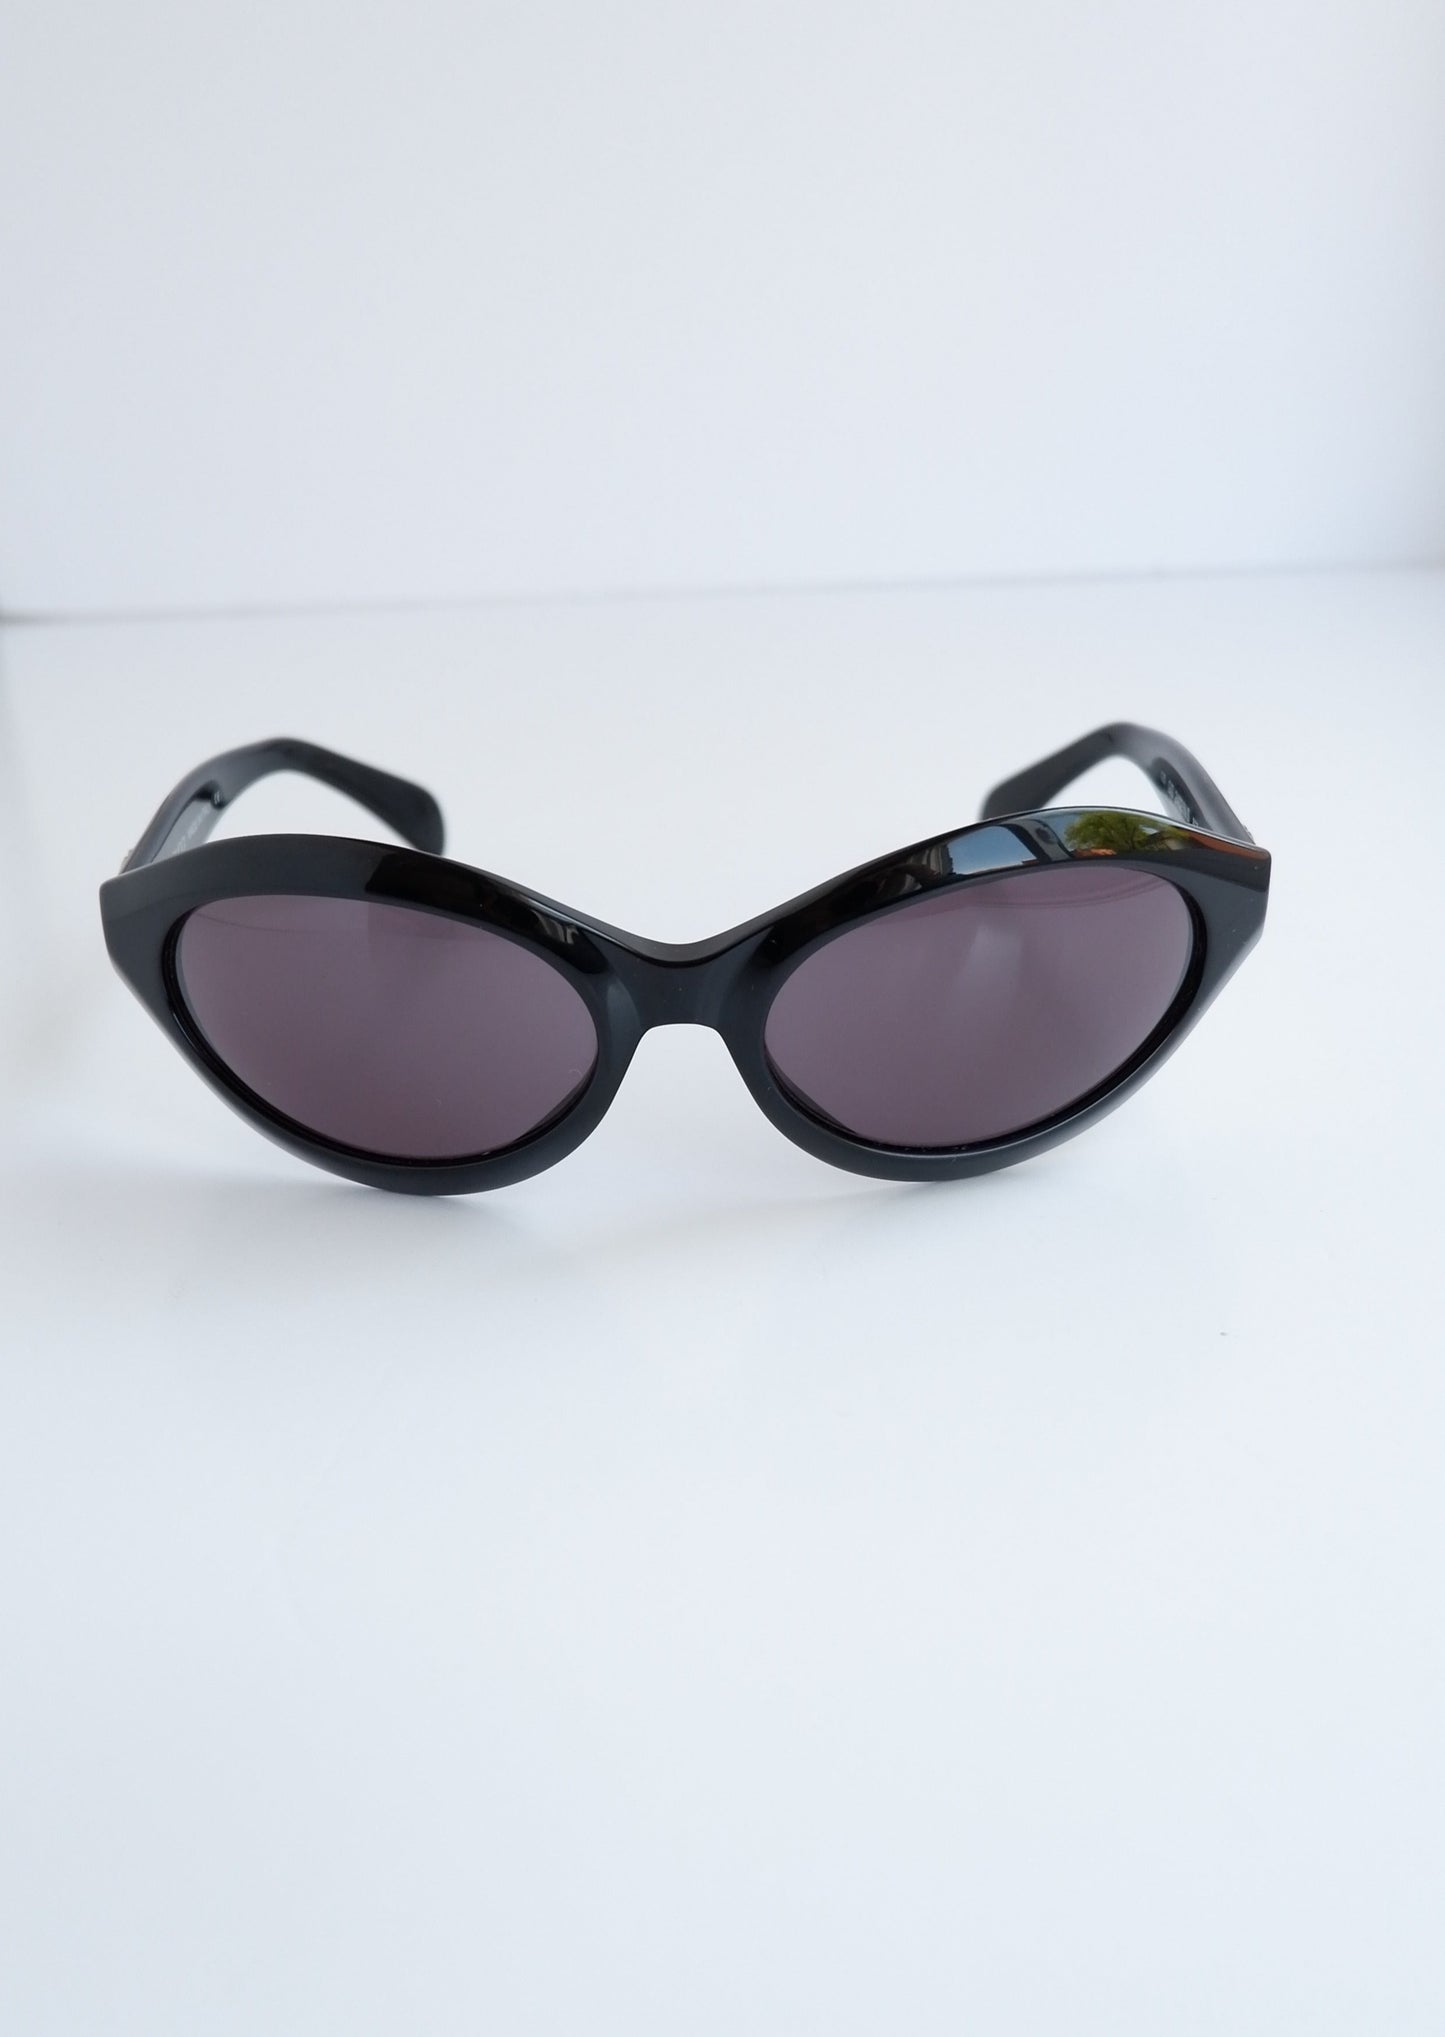 Authentic Preowned Vintage Gucci Black Round Frame Sunglasses